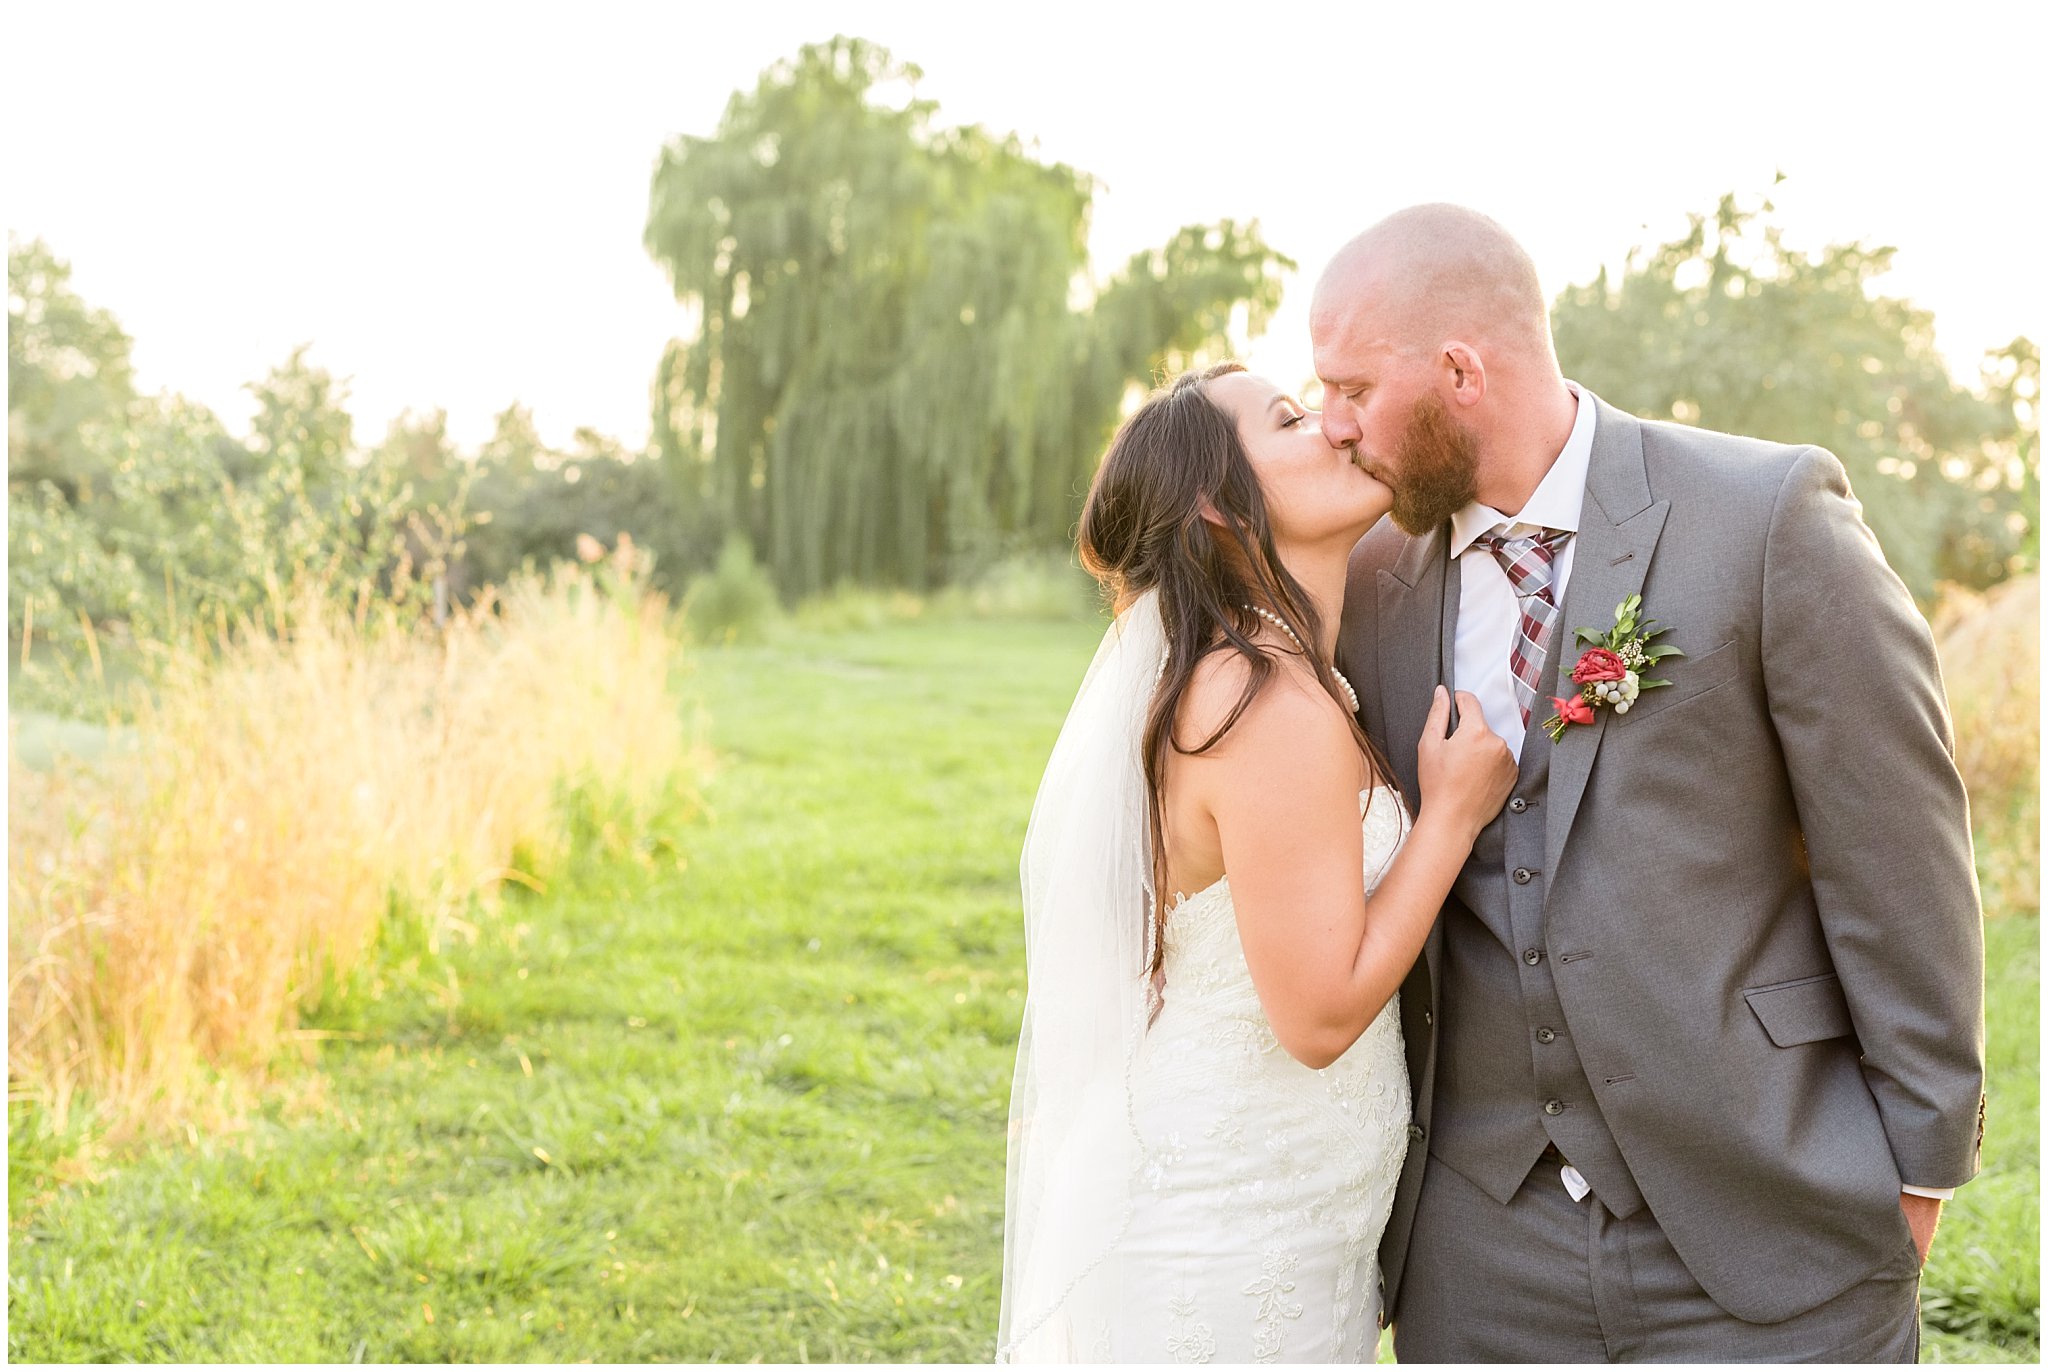 Layton Wedding Photography | Bride and groom kiss | Jessie and Dallin Photography